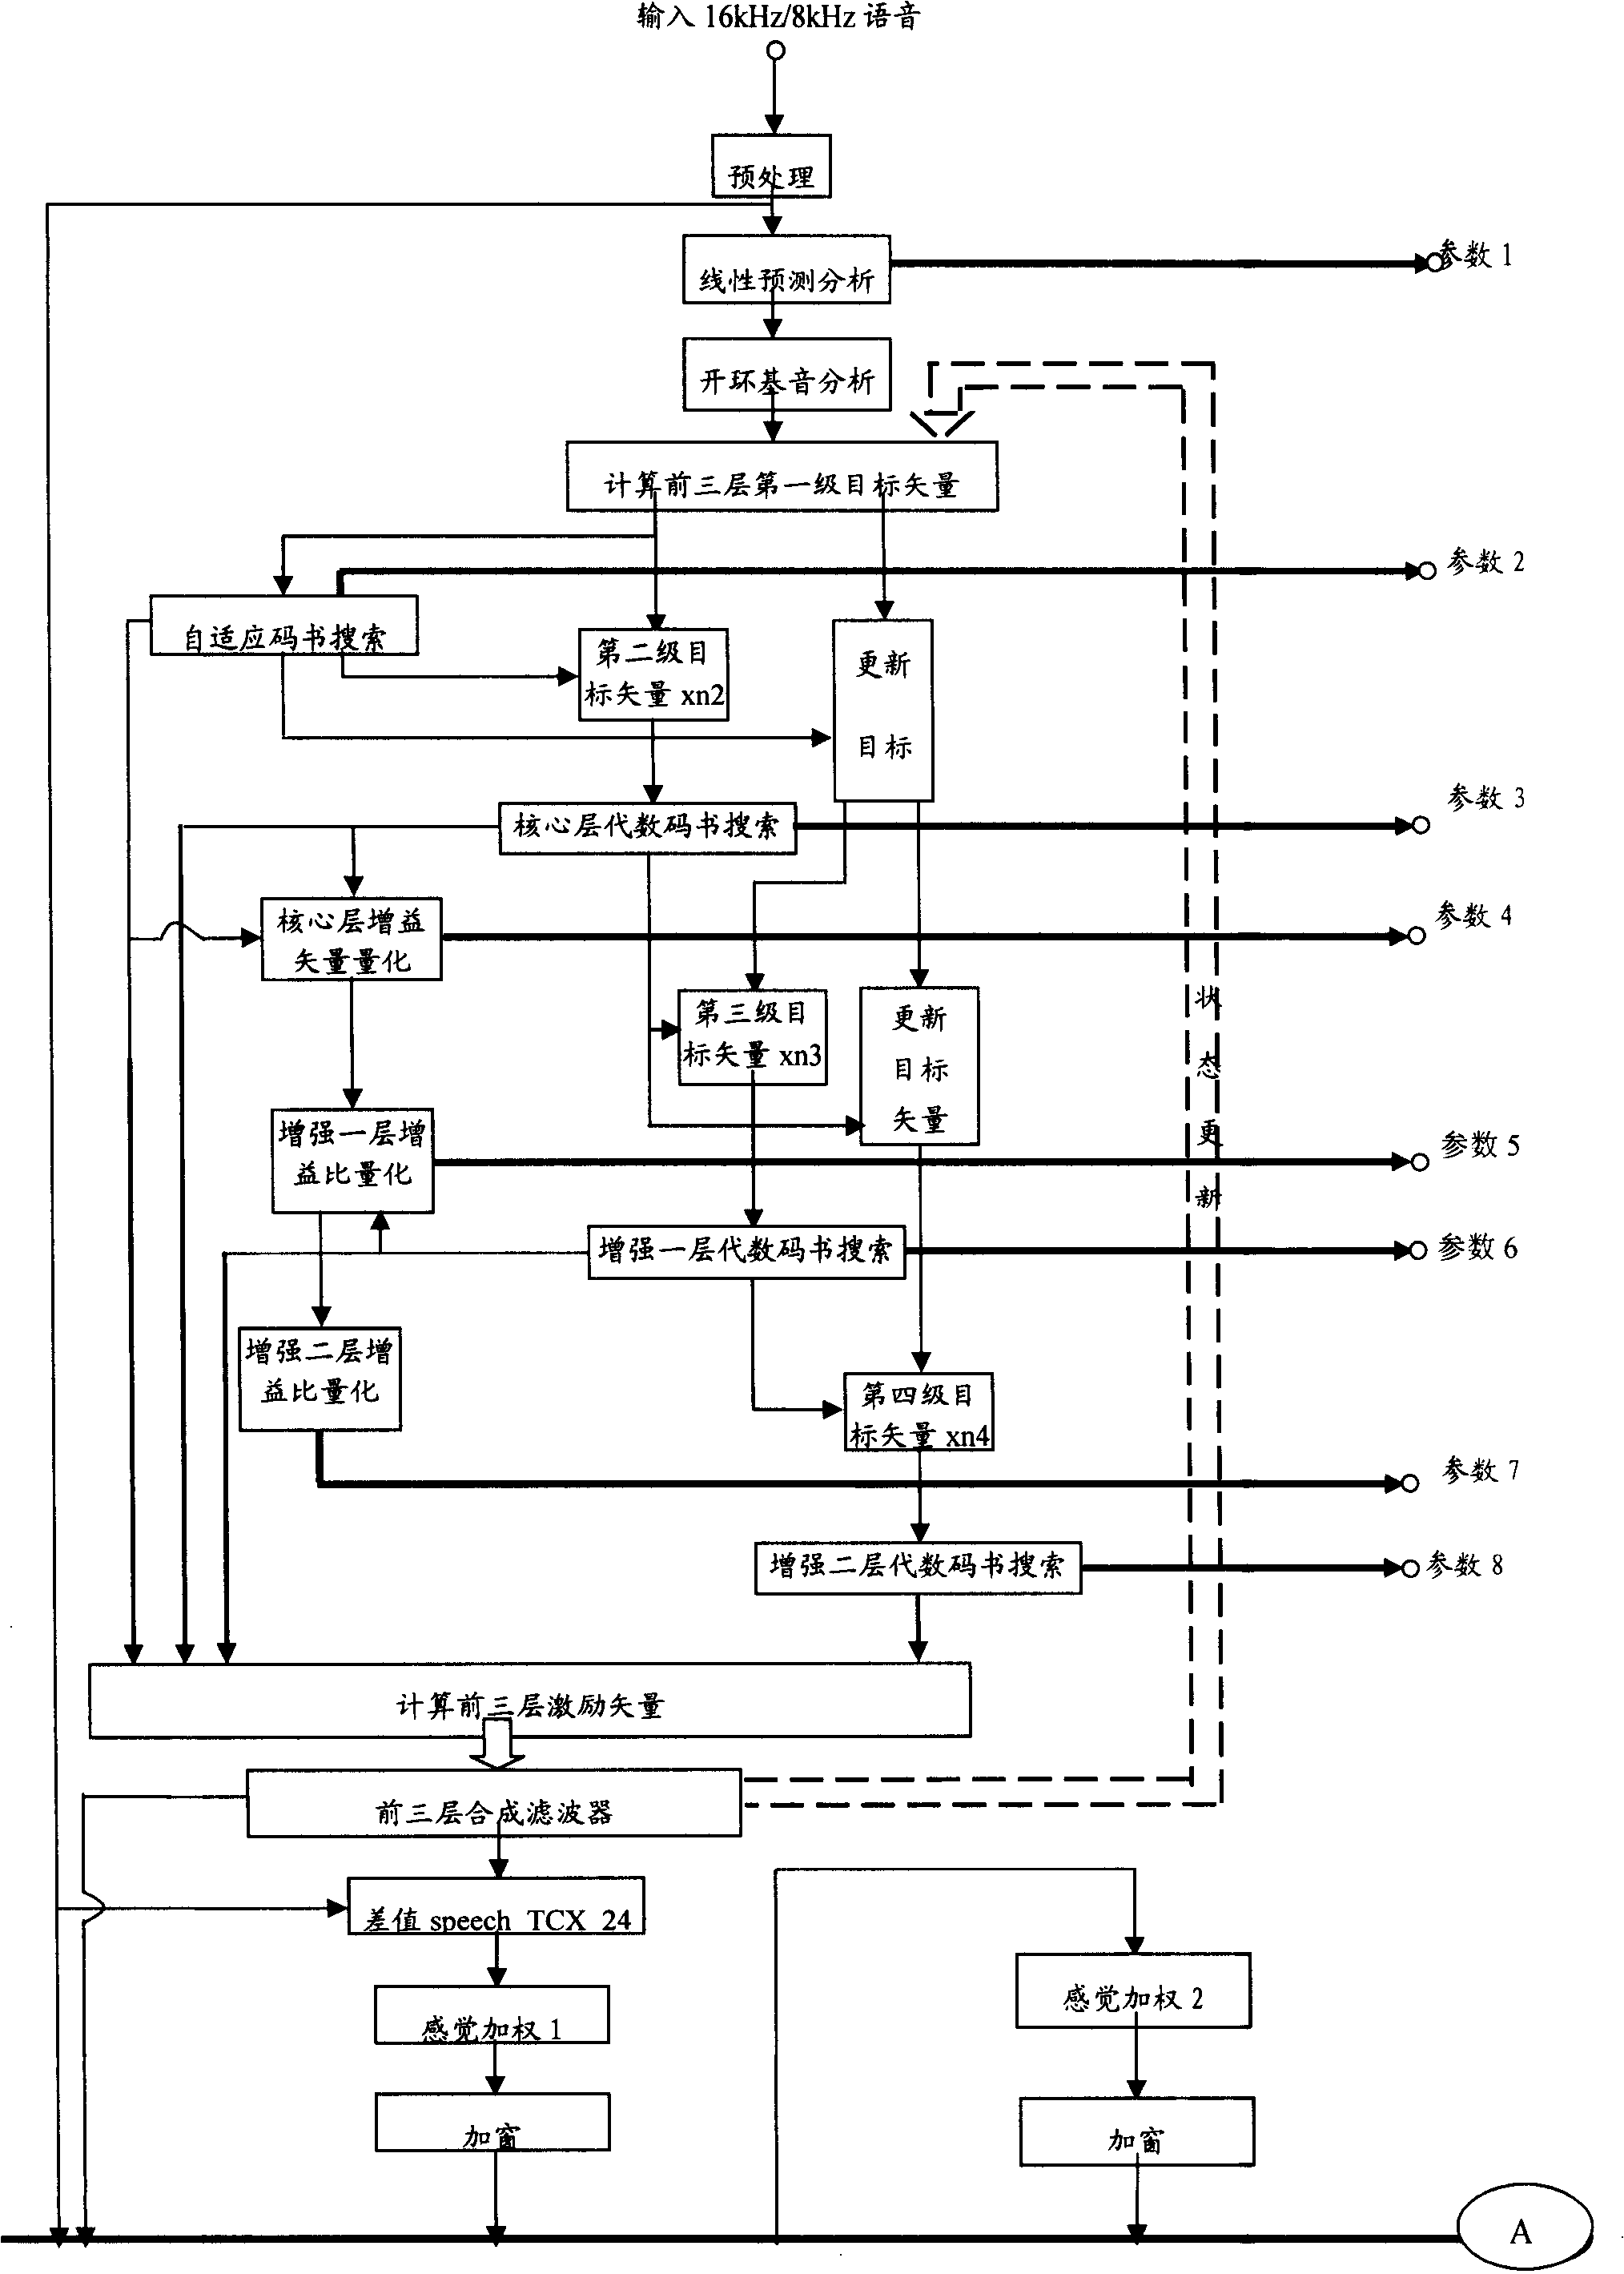 Embedded type coding, decoding method, encoder, decoder as well as system